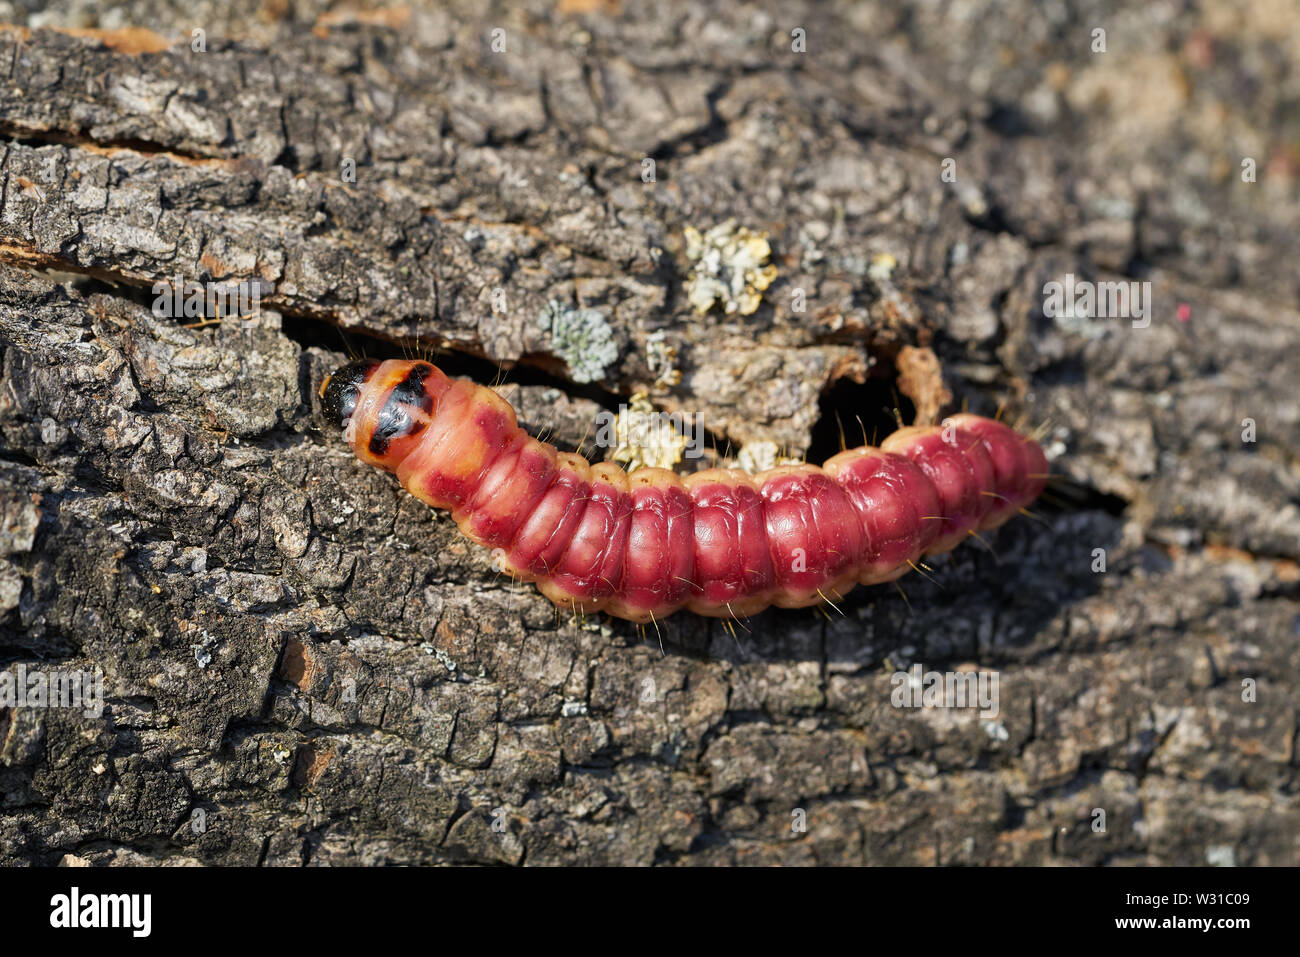 Caterpillar of a Cossus cossus on the bark of a tree Stock Photo